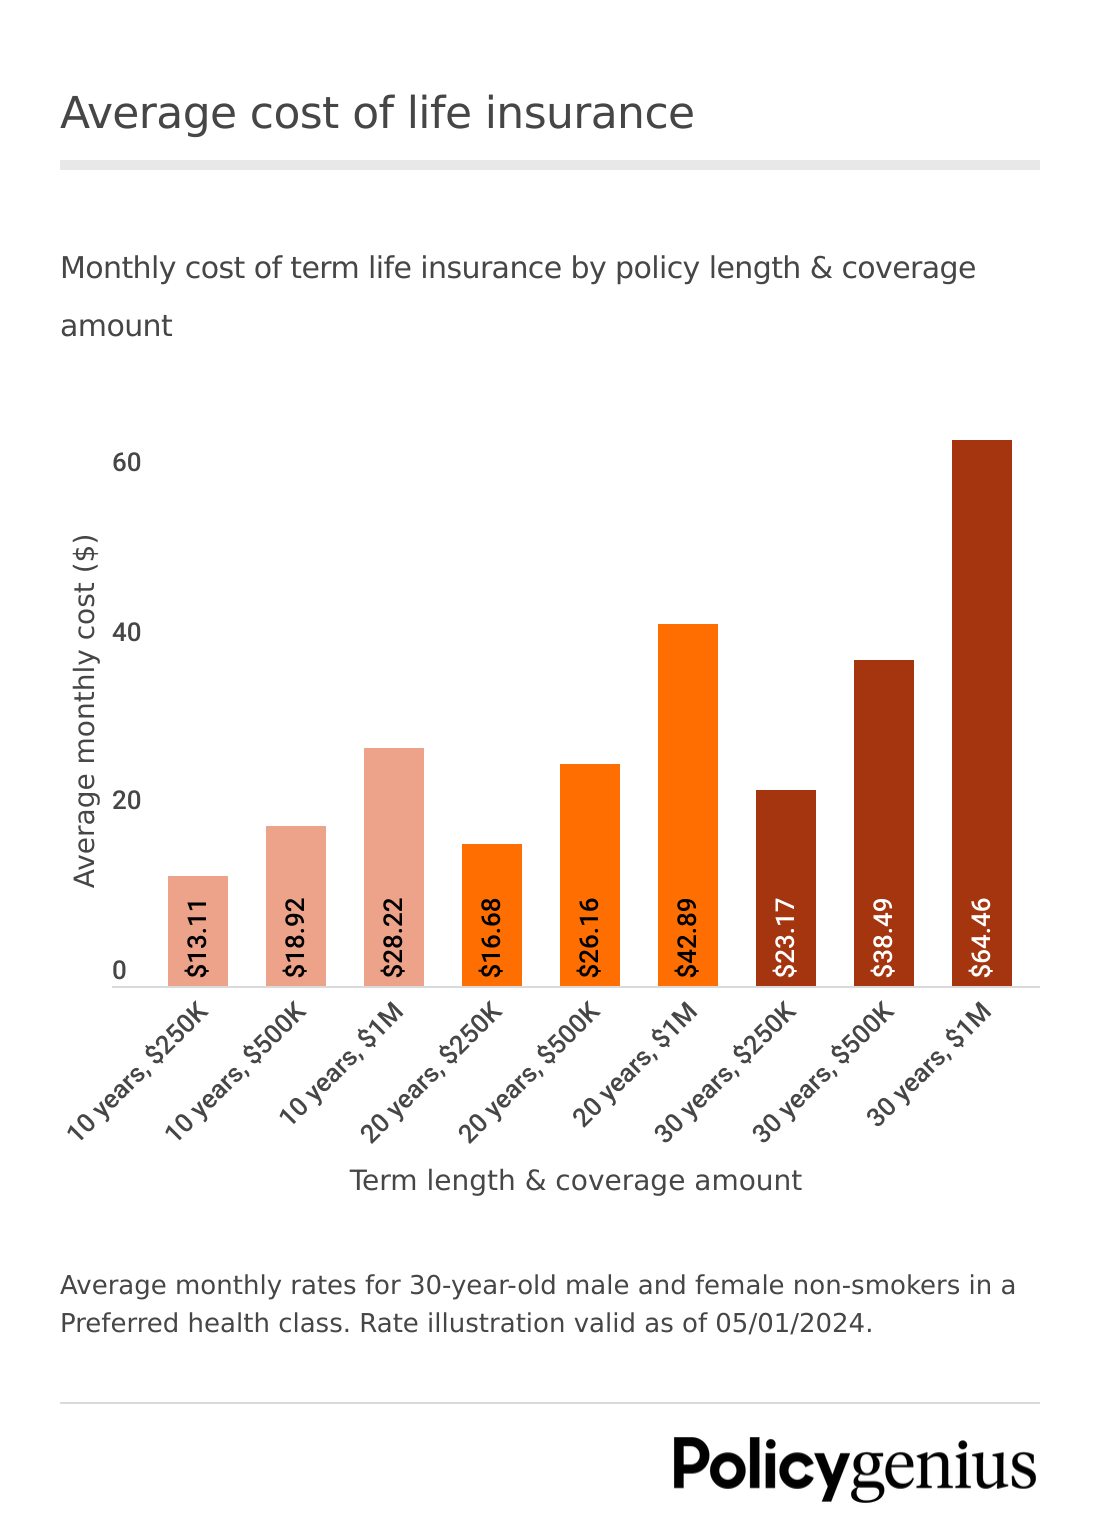 Monthly cost of term life insurance by policy length & coverage amount.